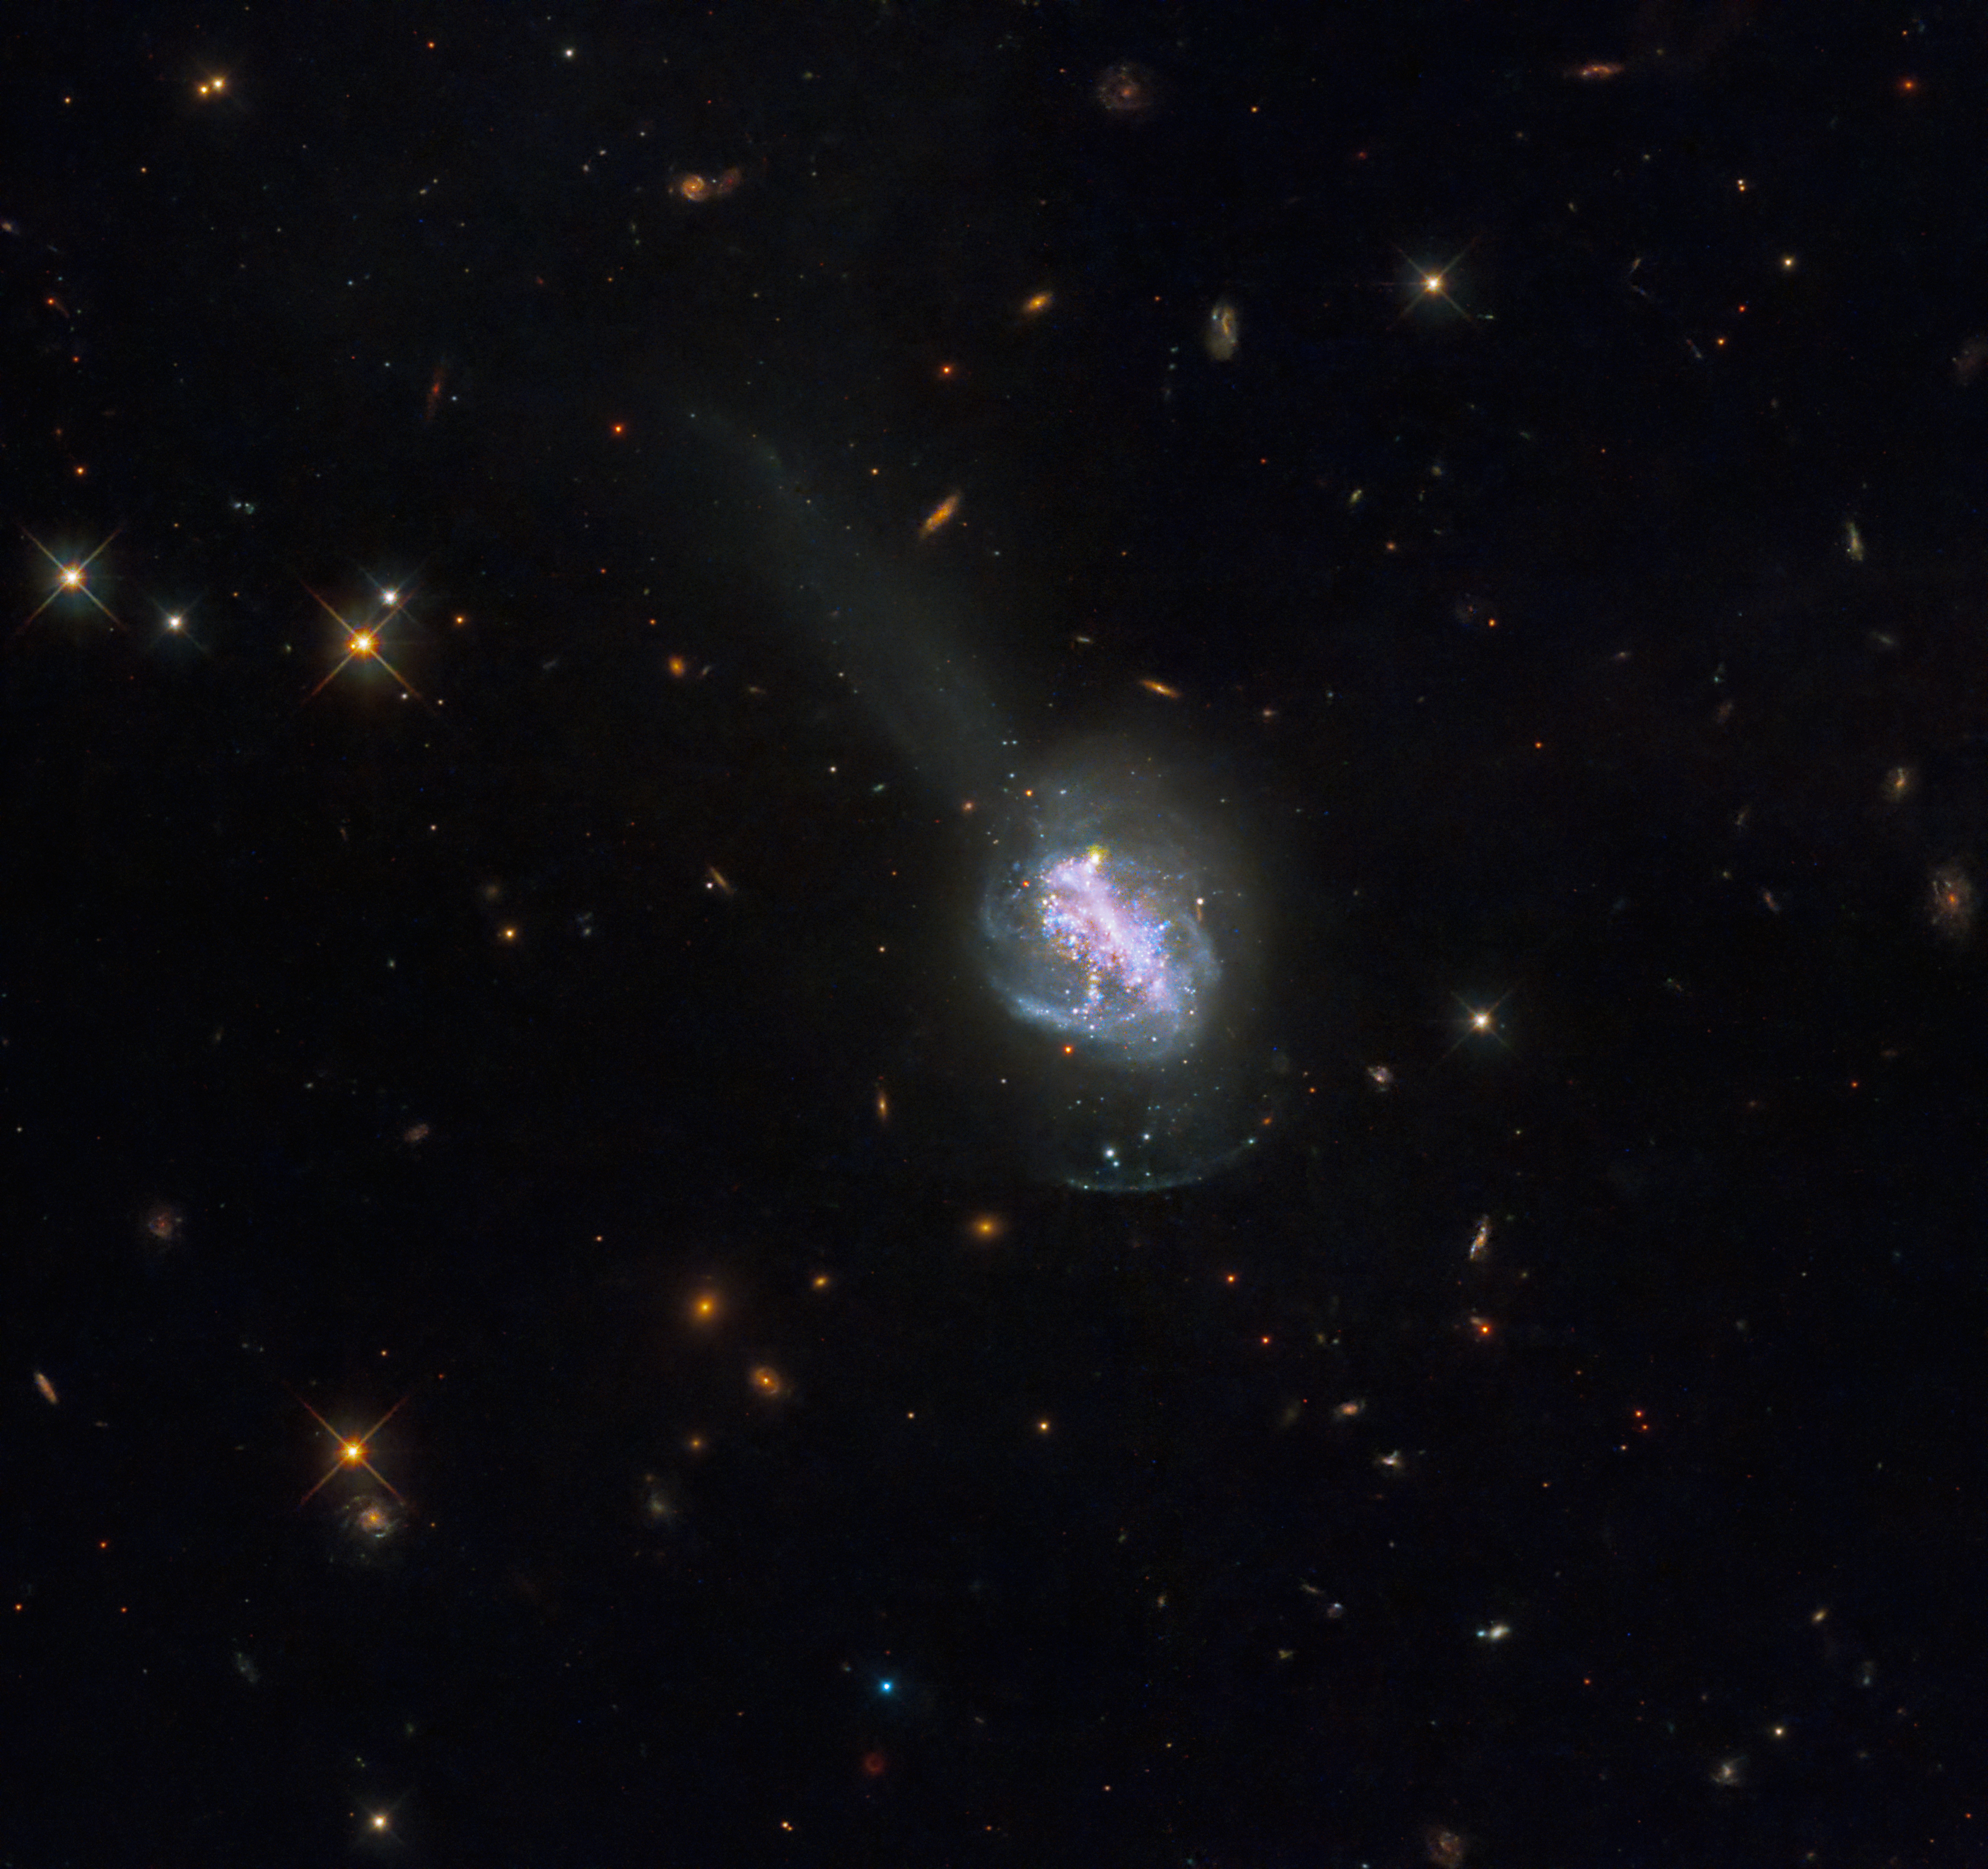 This new NASA Hubble Space Telescope image shows ESO 185-IG013, a luminous blue compact galaxy (BCG). BCGs are nearby galaxies that show an intense burst of star formation. They are unusually blue in visible light, which sets them apart from other high-starburst galaxies that emit more infrared light.